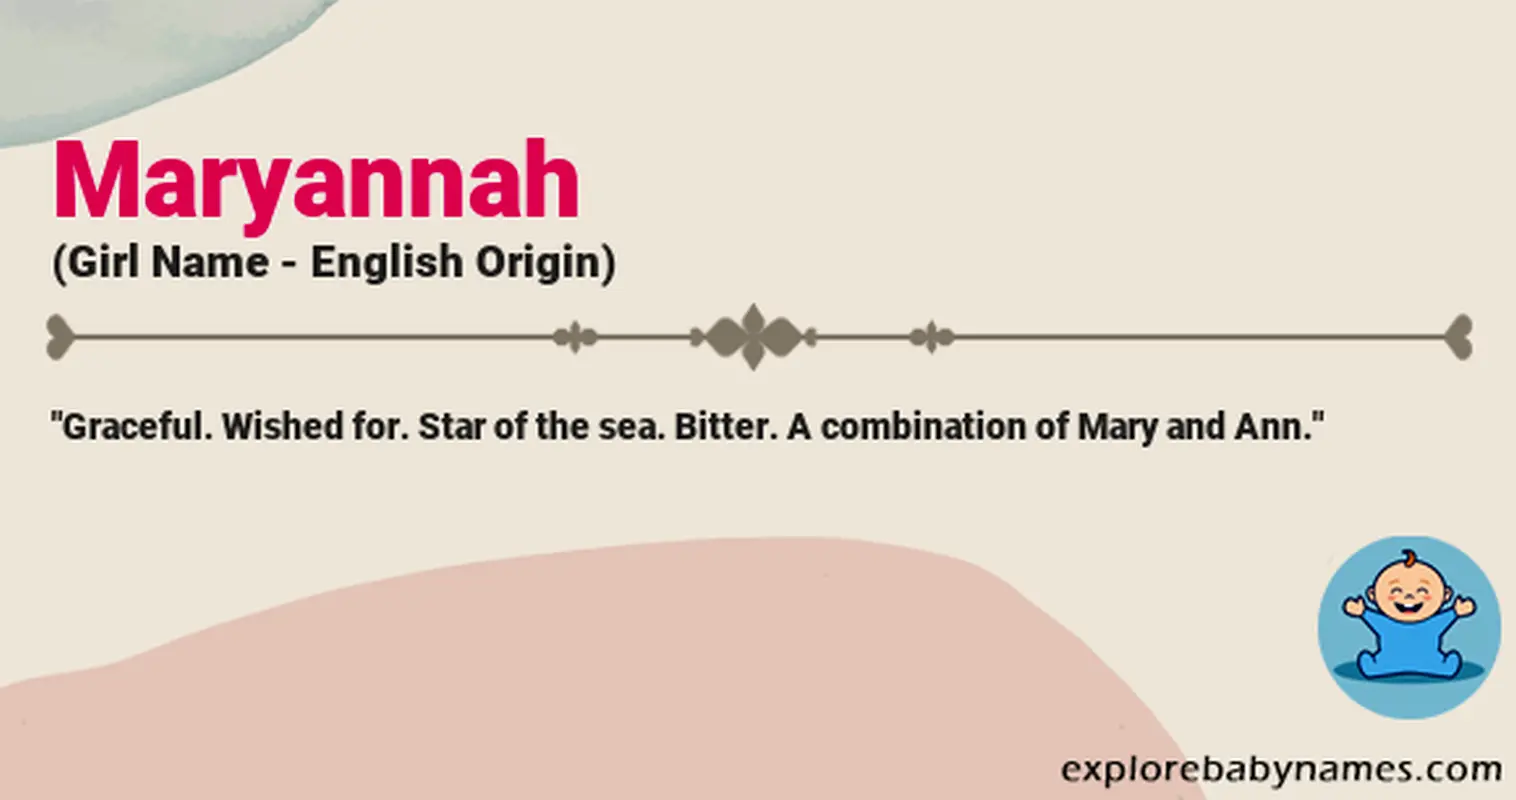 Meaning of Maryannah